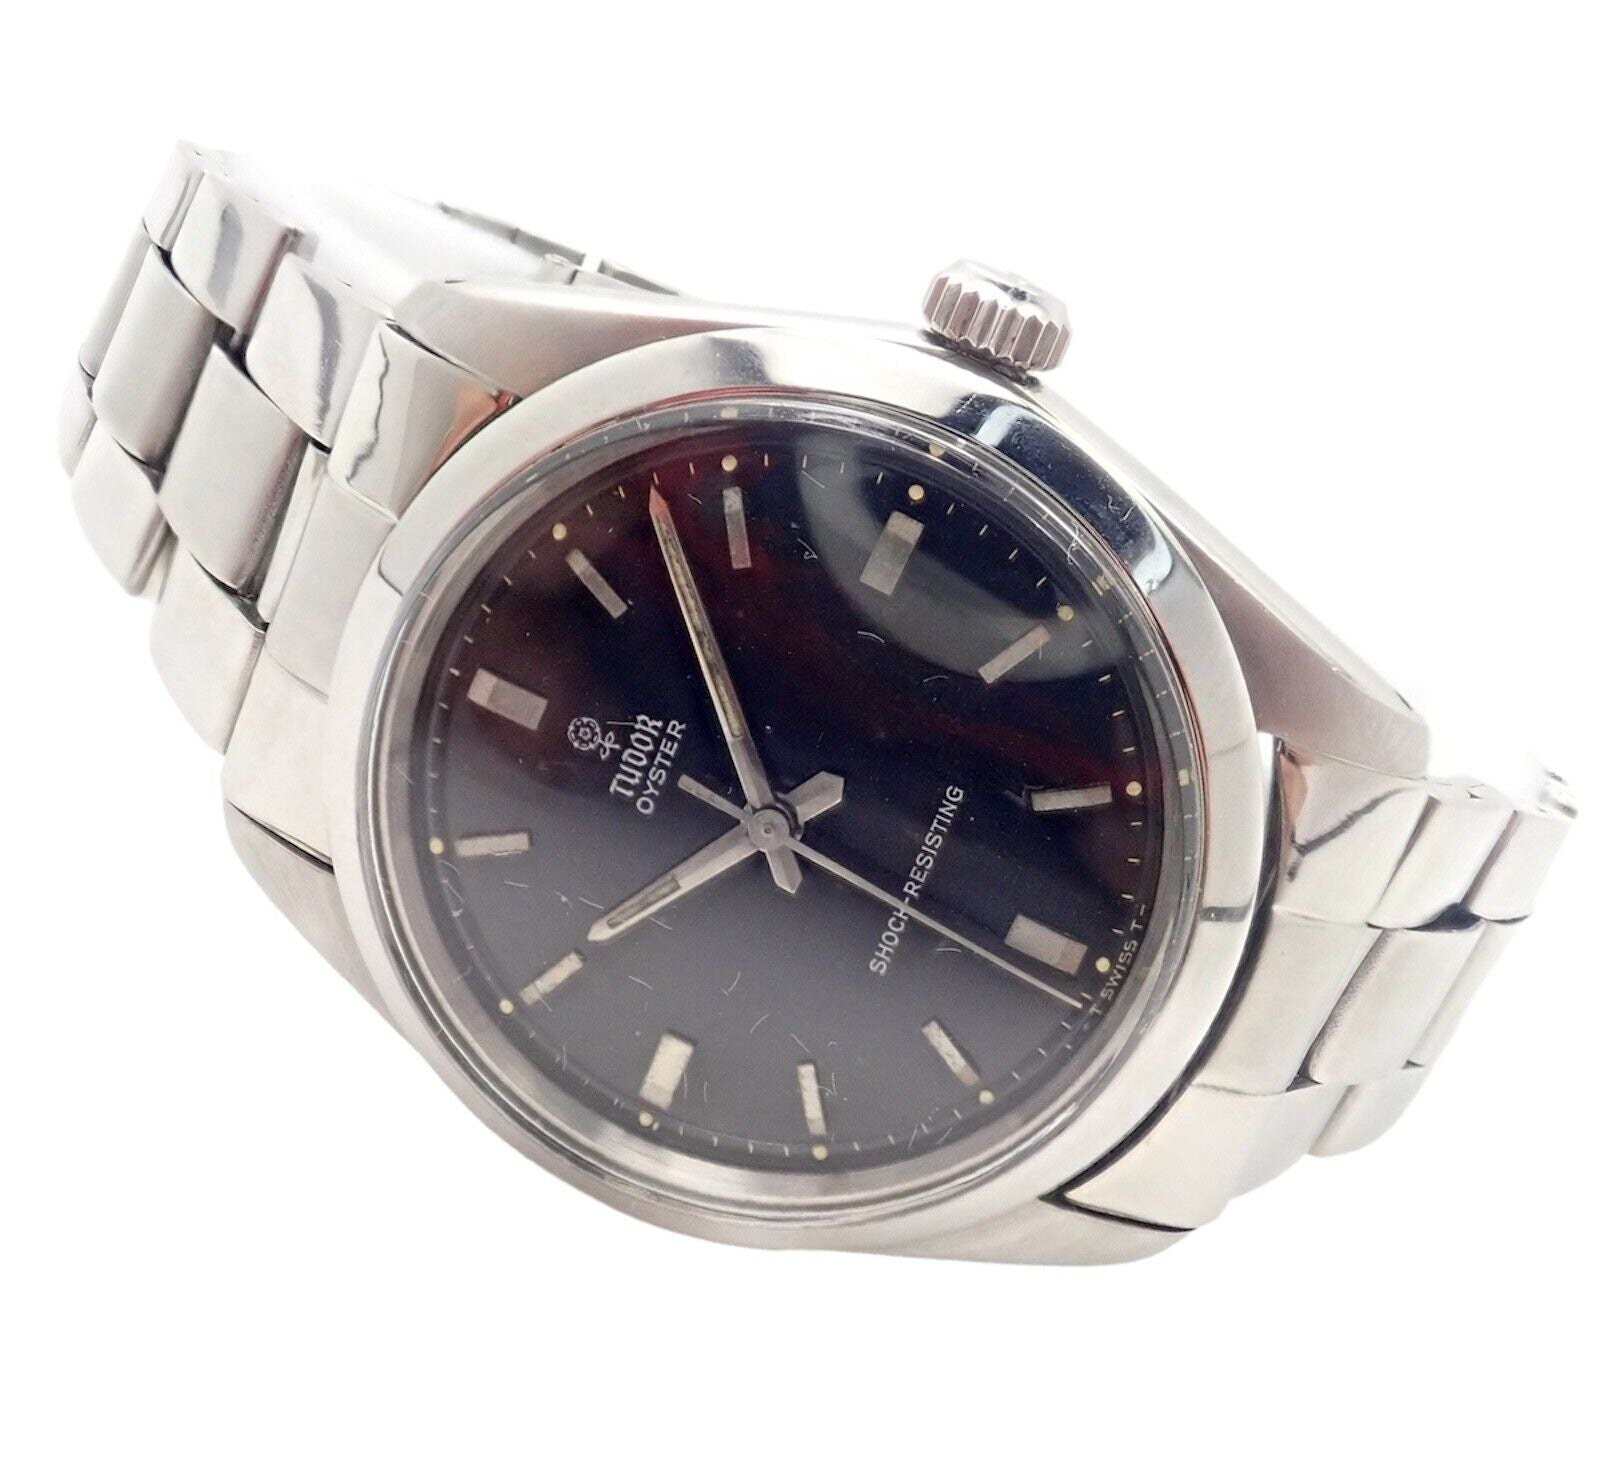 Rolex Tudor Jewelry & Watches:Watches, Parts & Accessories:Watches:Wristwatches Authentic Vintage! Rolex Tudor Stainless Steel Manual Oyster Rose Logo Watch